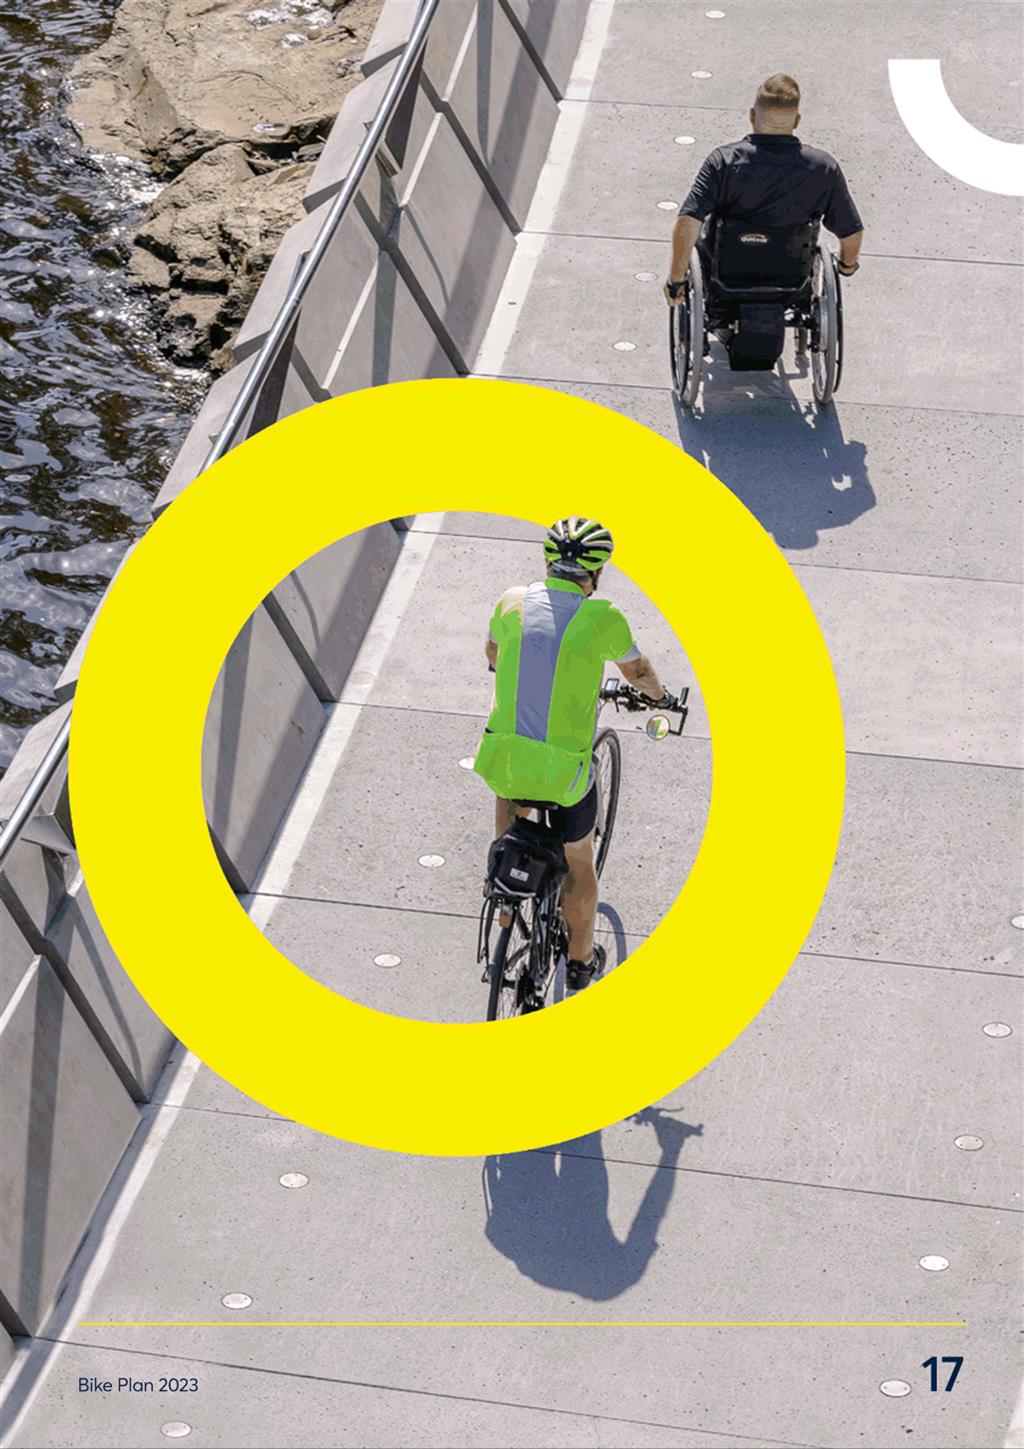 A person riding a bicycle on a bridge

Description automatically generated